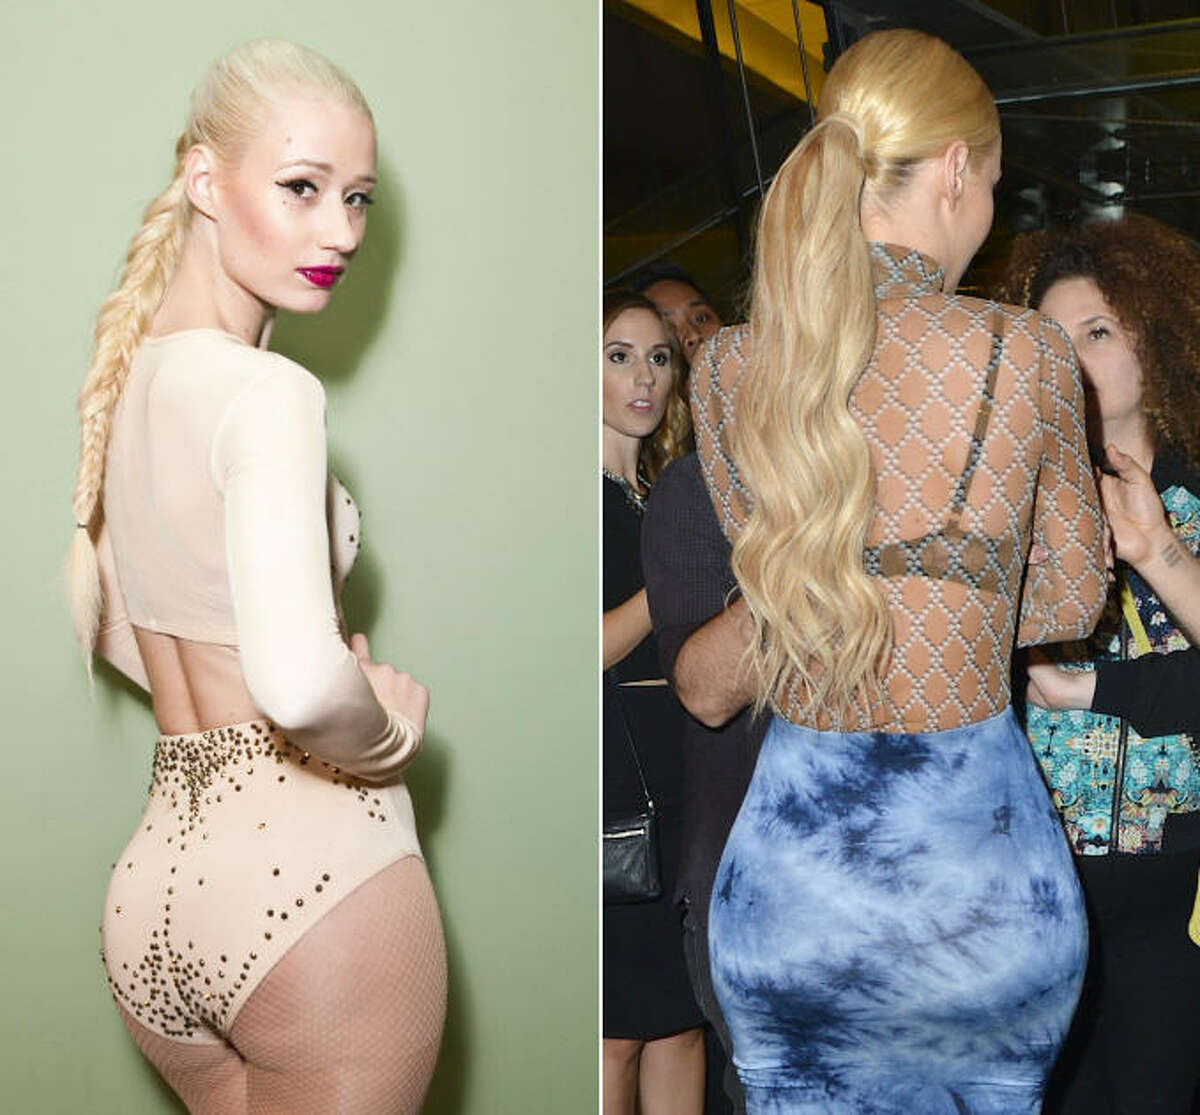 Iggy Azalea may or may not have a fake butt and the world demands answers*